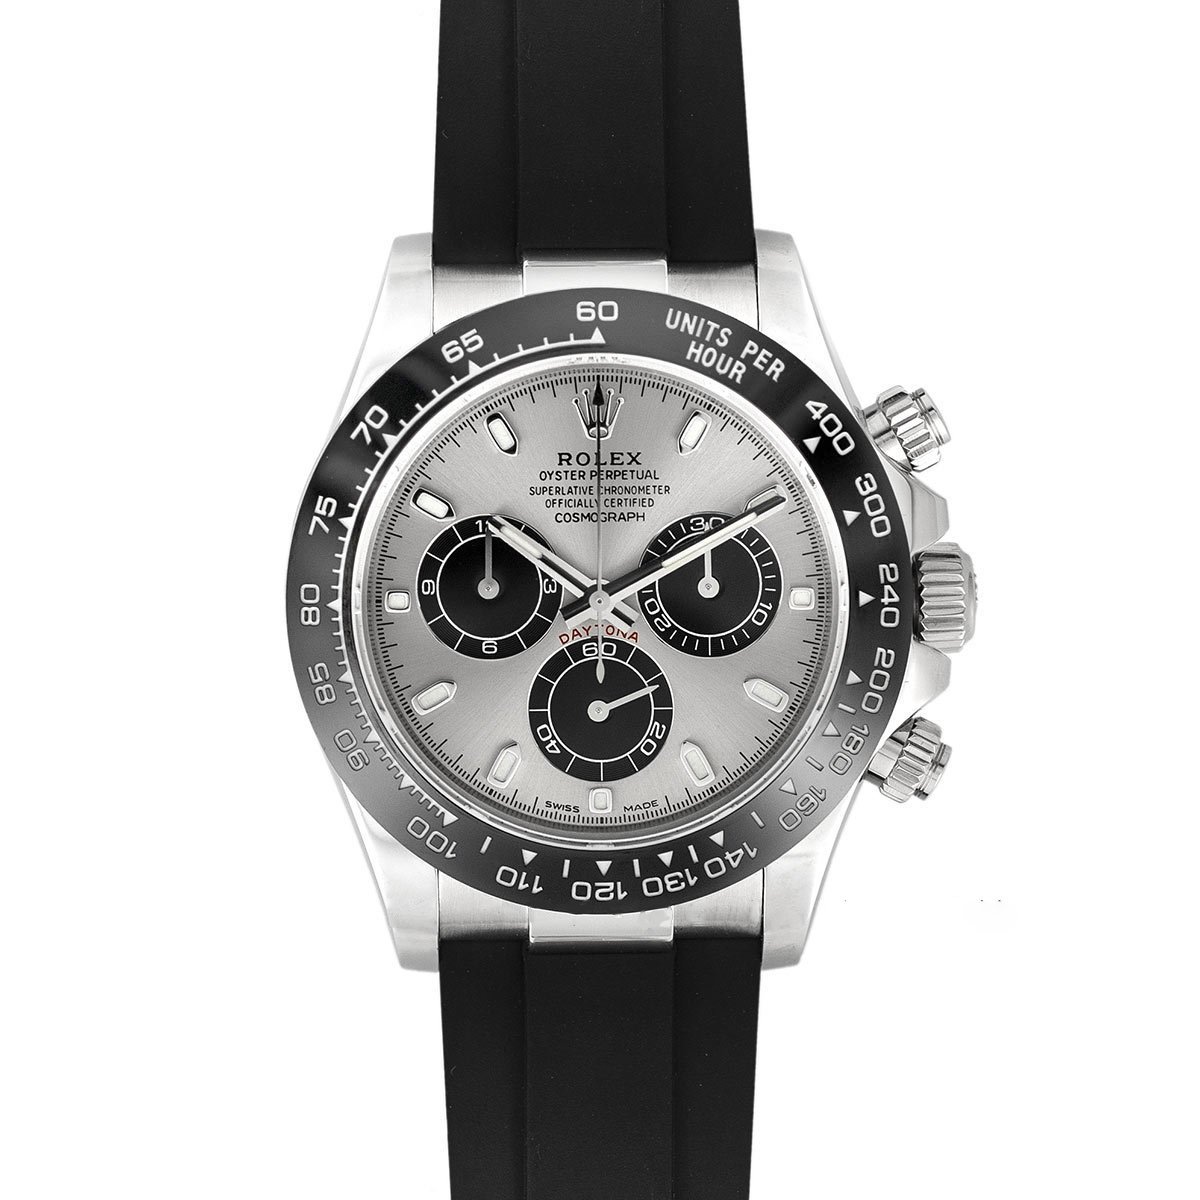 Daytona 116519LN Steel and Black Dial in White Gold - HontWatch